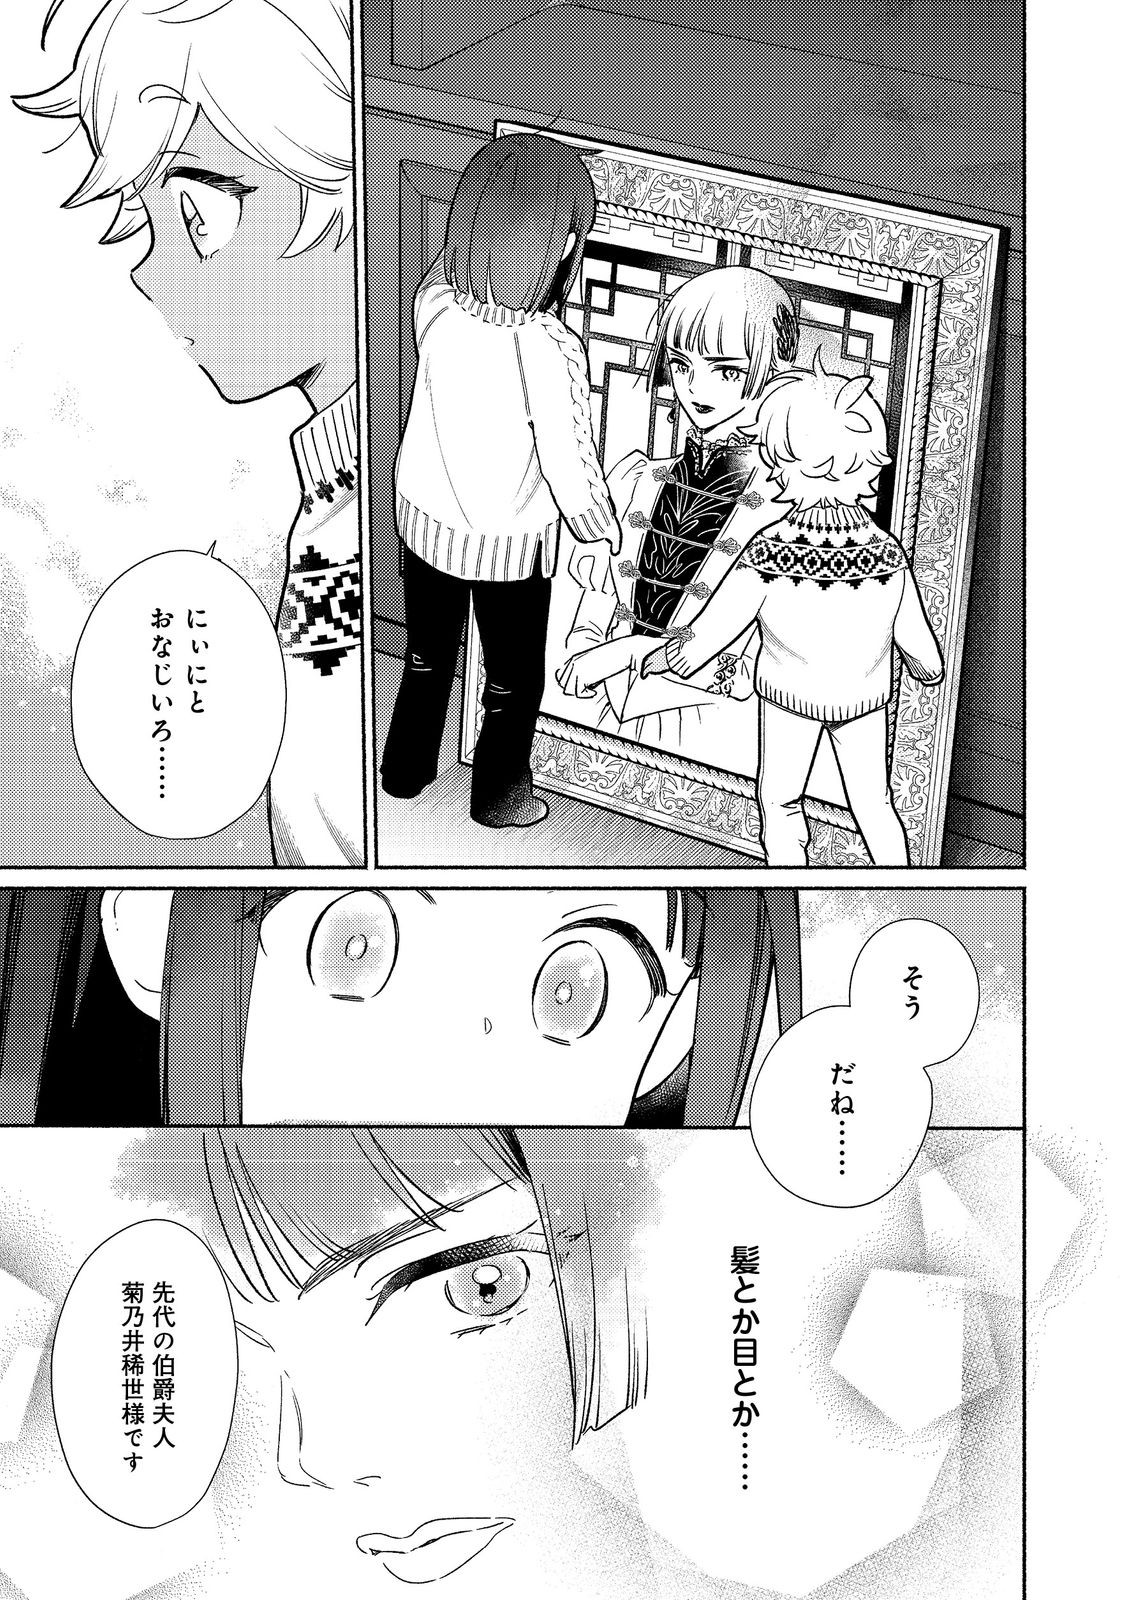 I’m the White Pig Nobleman 第27.1話 - Page 13